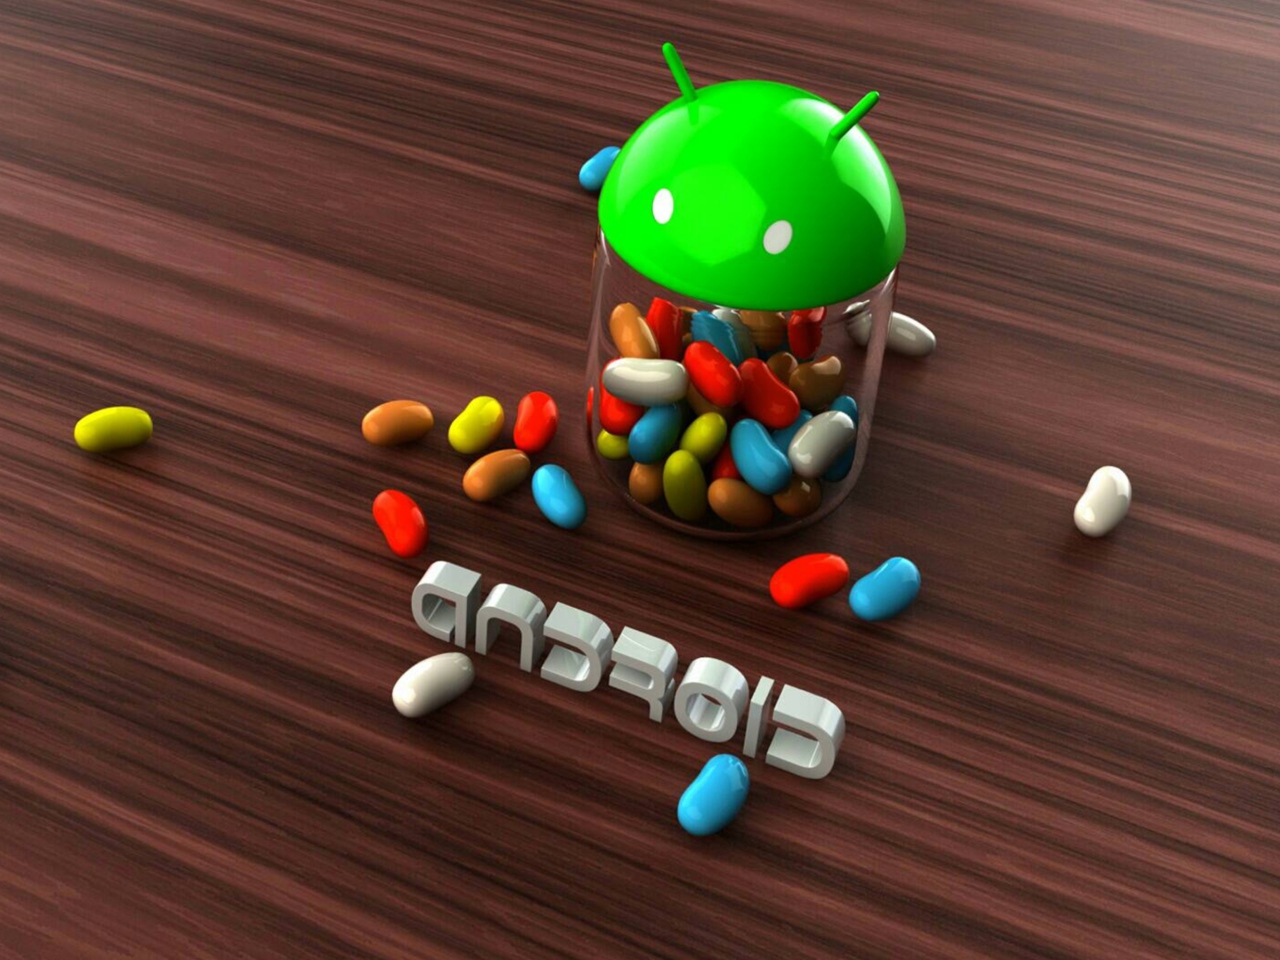 Android Jelly Bean wallpaper 1280x960